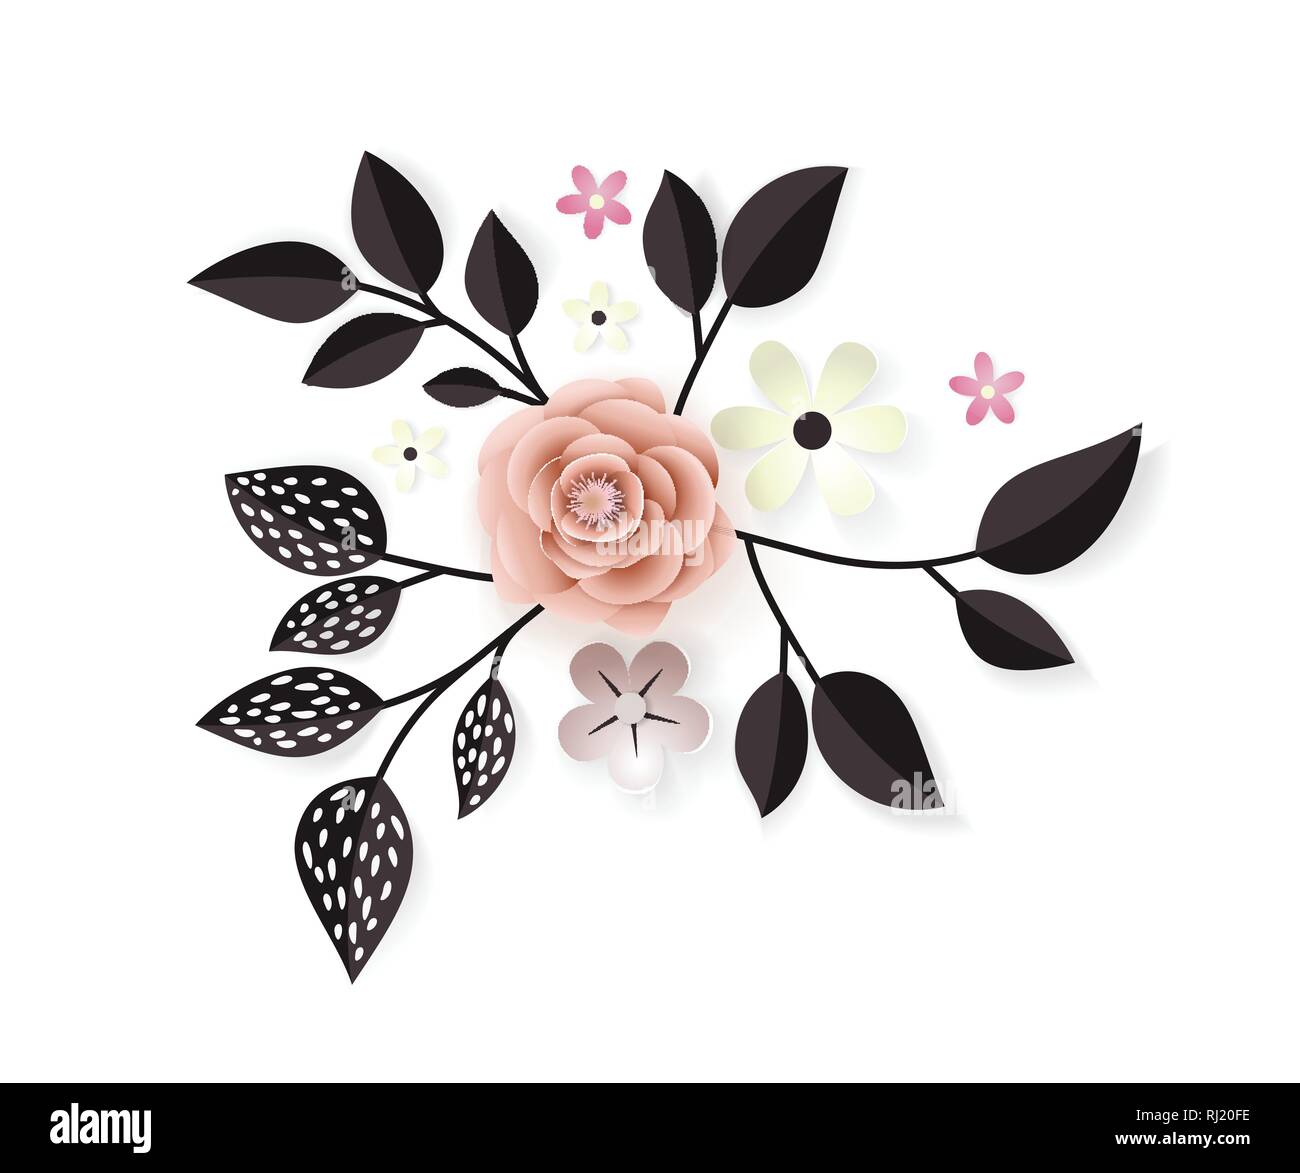 Paper Flower Cut Out Patterns, www.pixshark.com - Images Galleries With A  Bite!